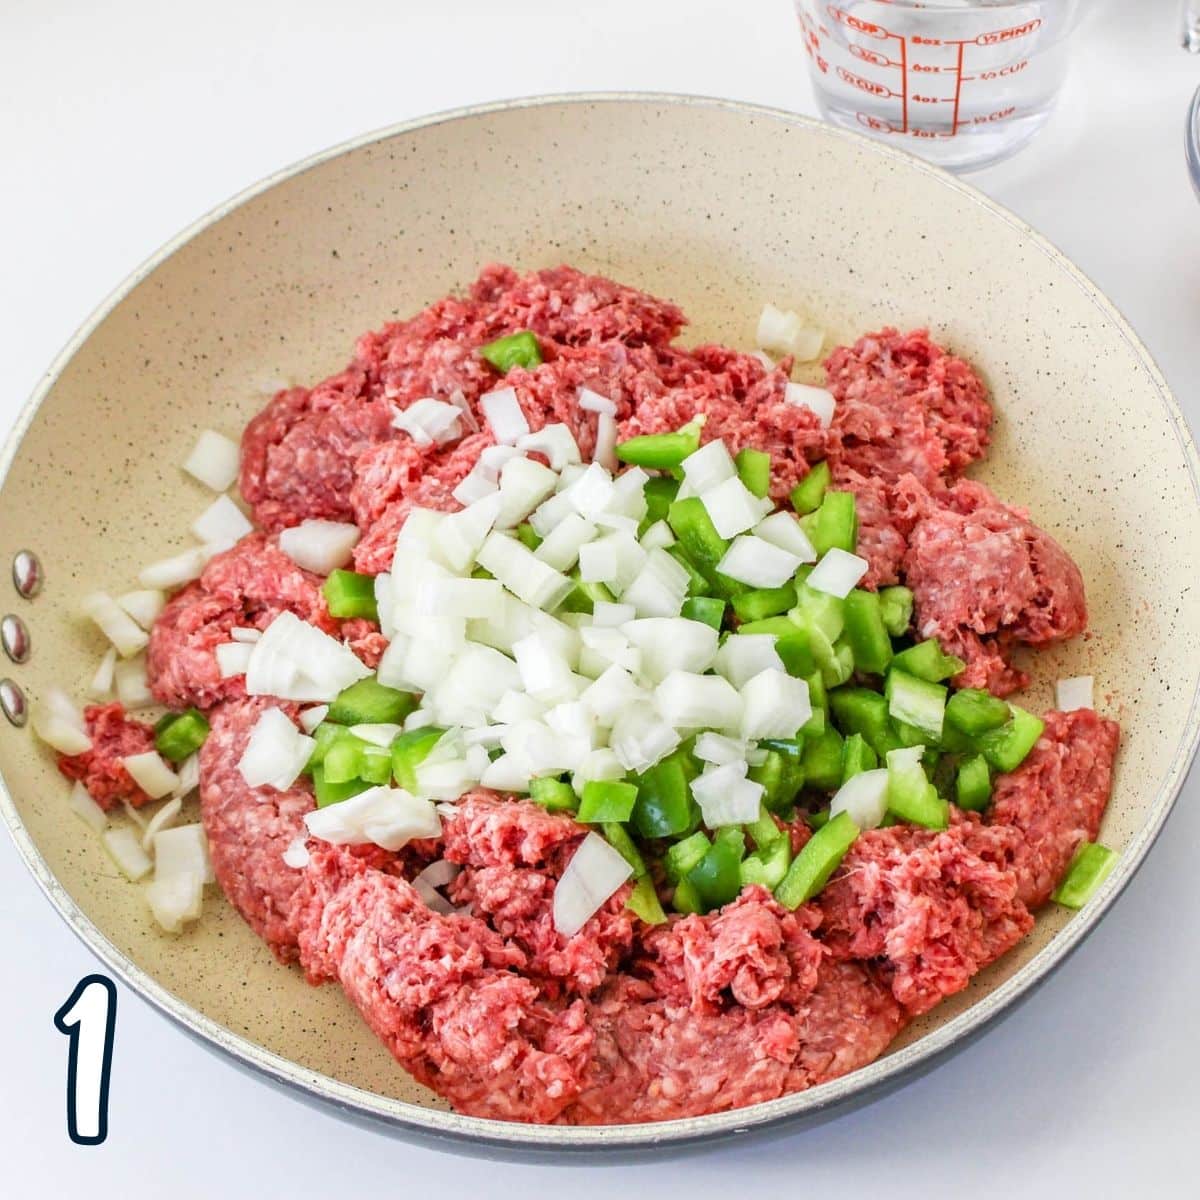 Ground beef, green pepper, and onion in a skillet.